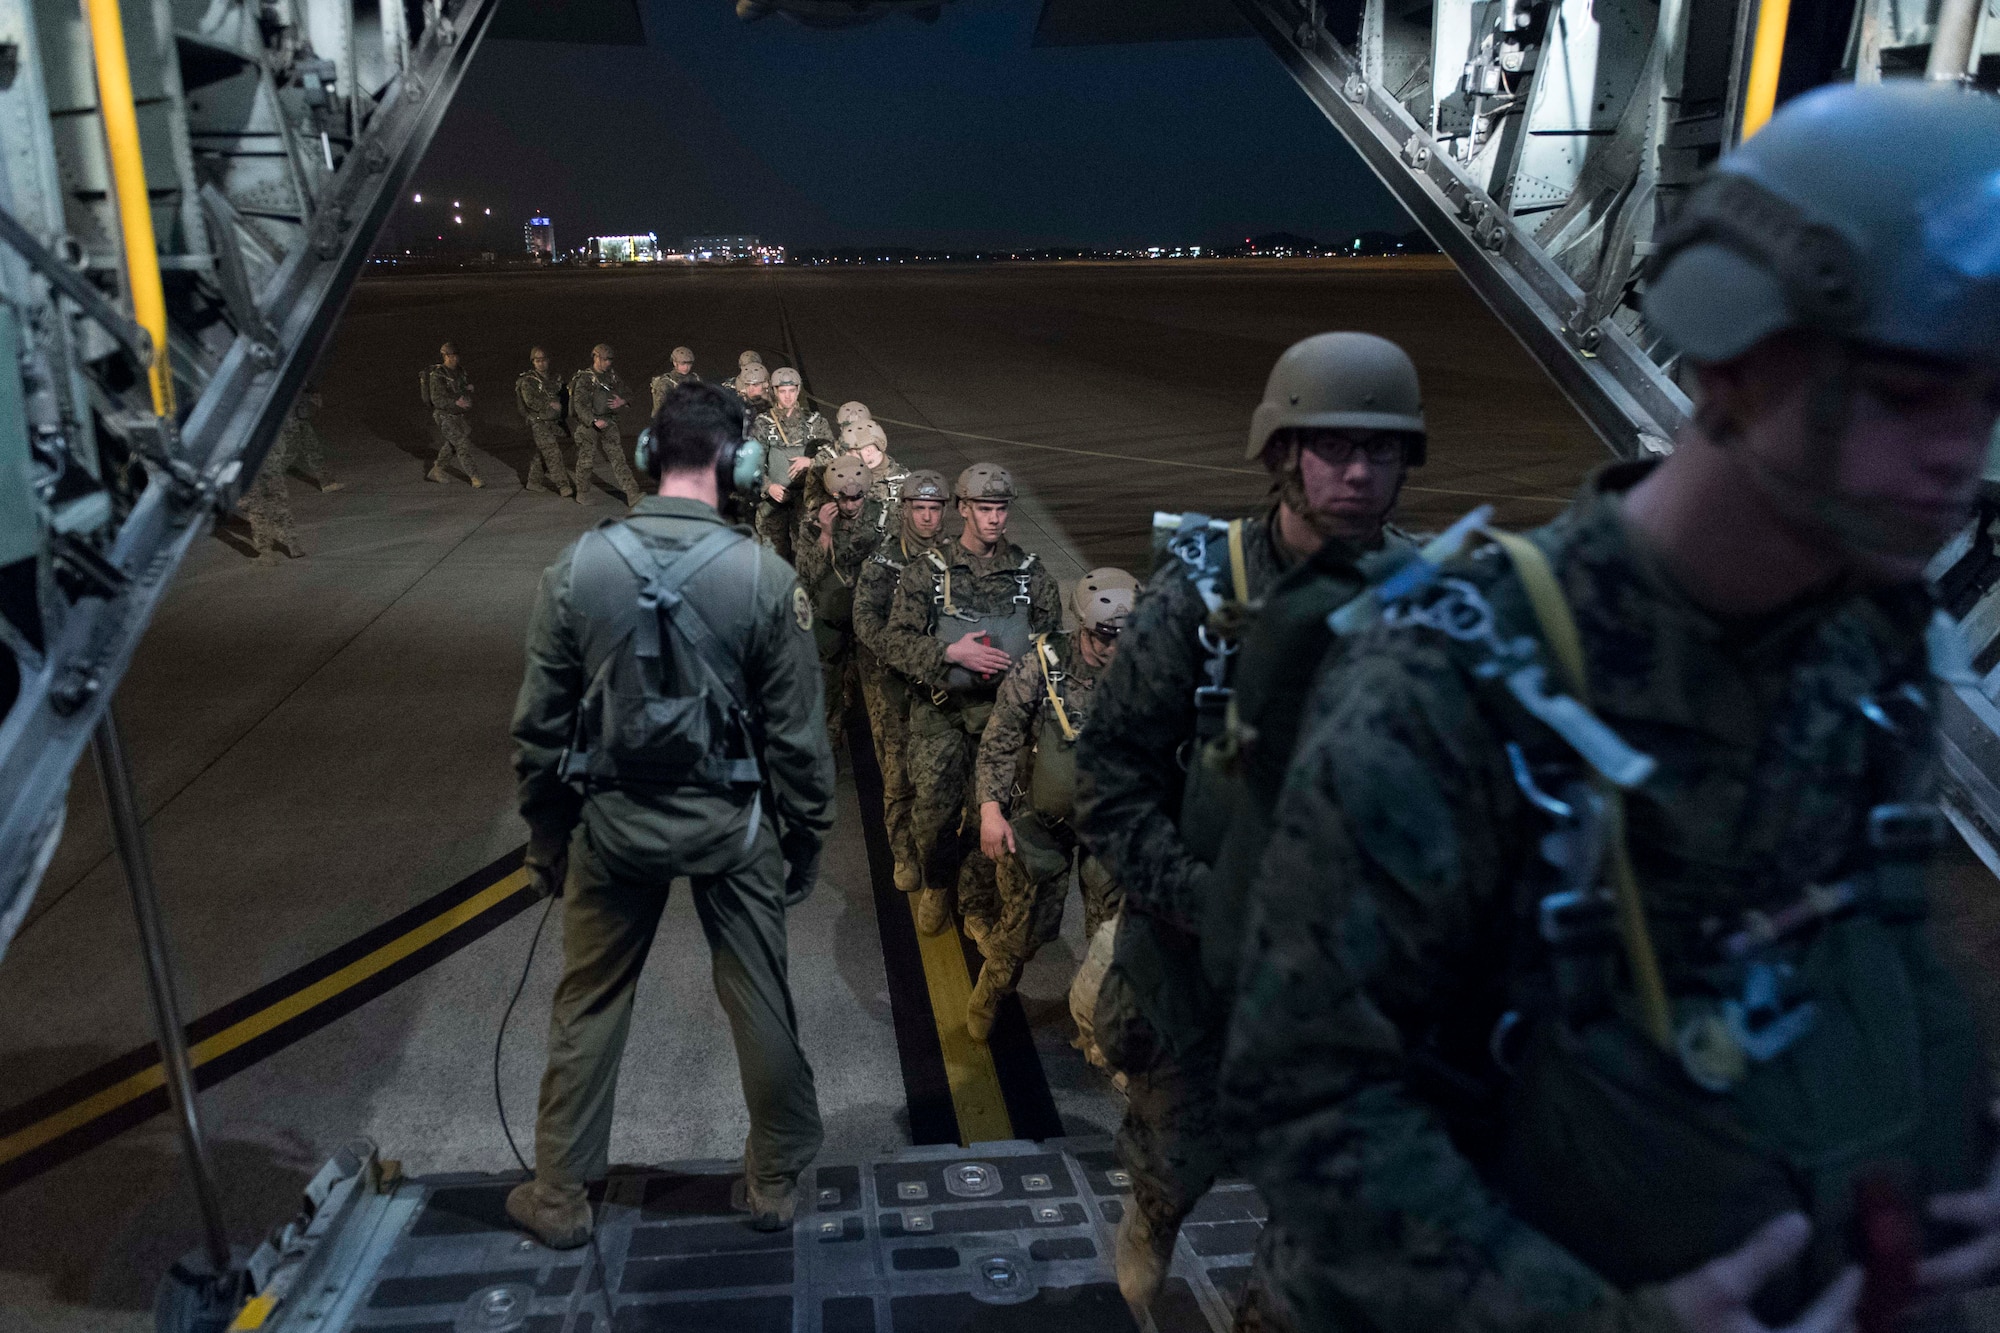 U.S. Marines from the 3rd Reconnaissance Battalion, 3rd Marine Division, III Marine Expeditionary Force board a U.S. Air Force C-130 Hercules during jump week at Yokota Air Base, Japan, Jan. 11, 2017. The 36th Airlift Squadron provided airlift support to the U.S. Marine Corp’s week-long jump training. (U.S. Air Force photo by Staff Sgt. Michael Washburn/Released) 